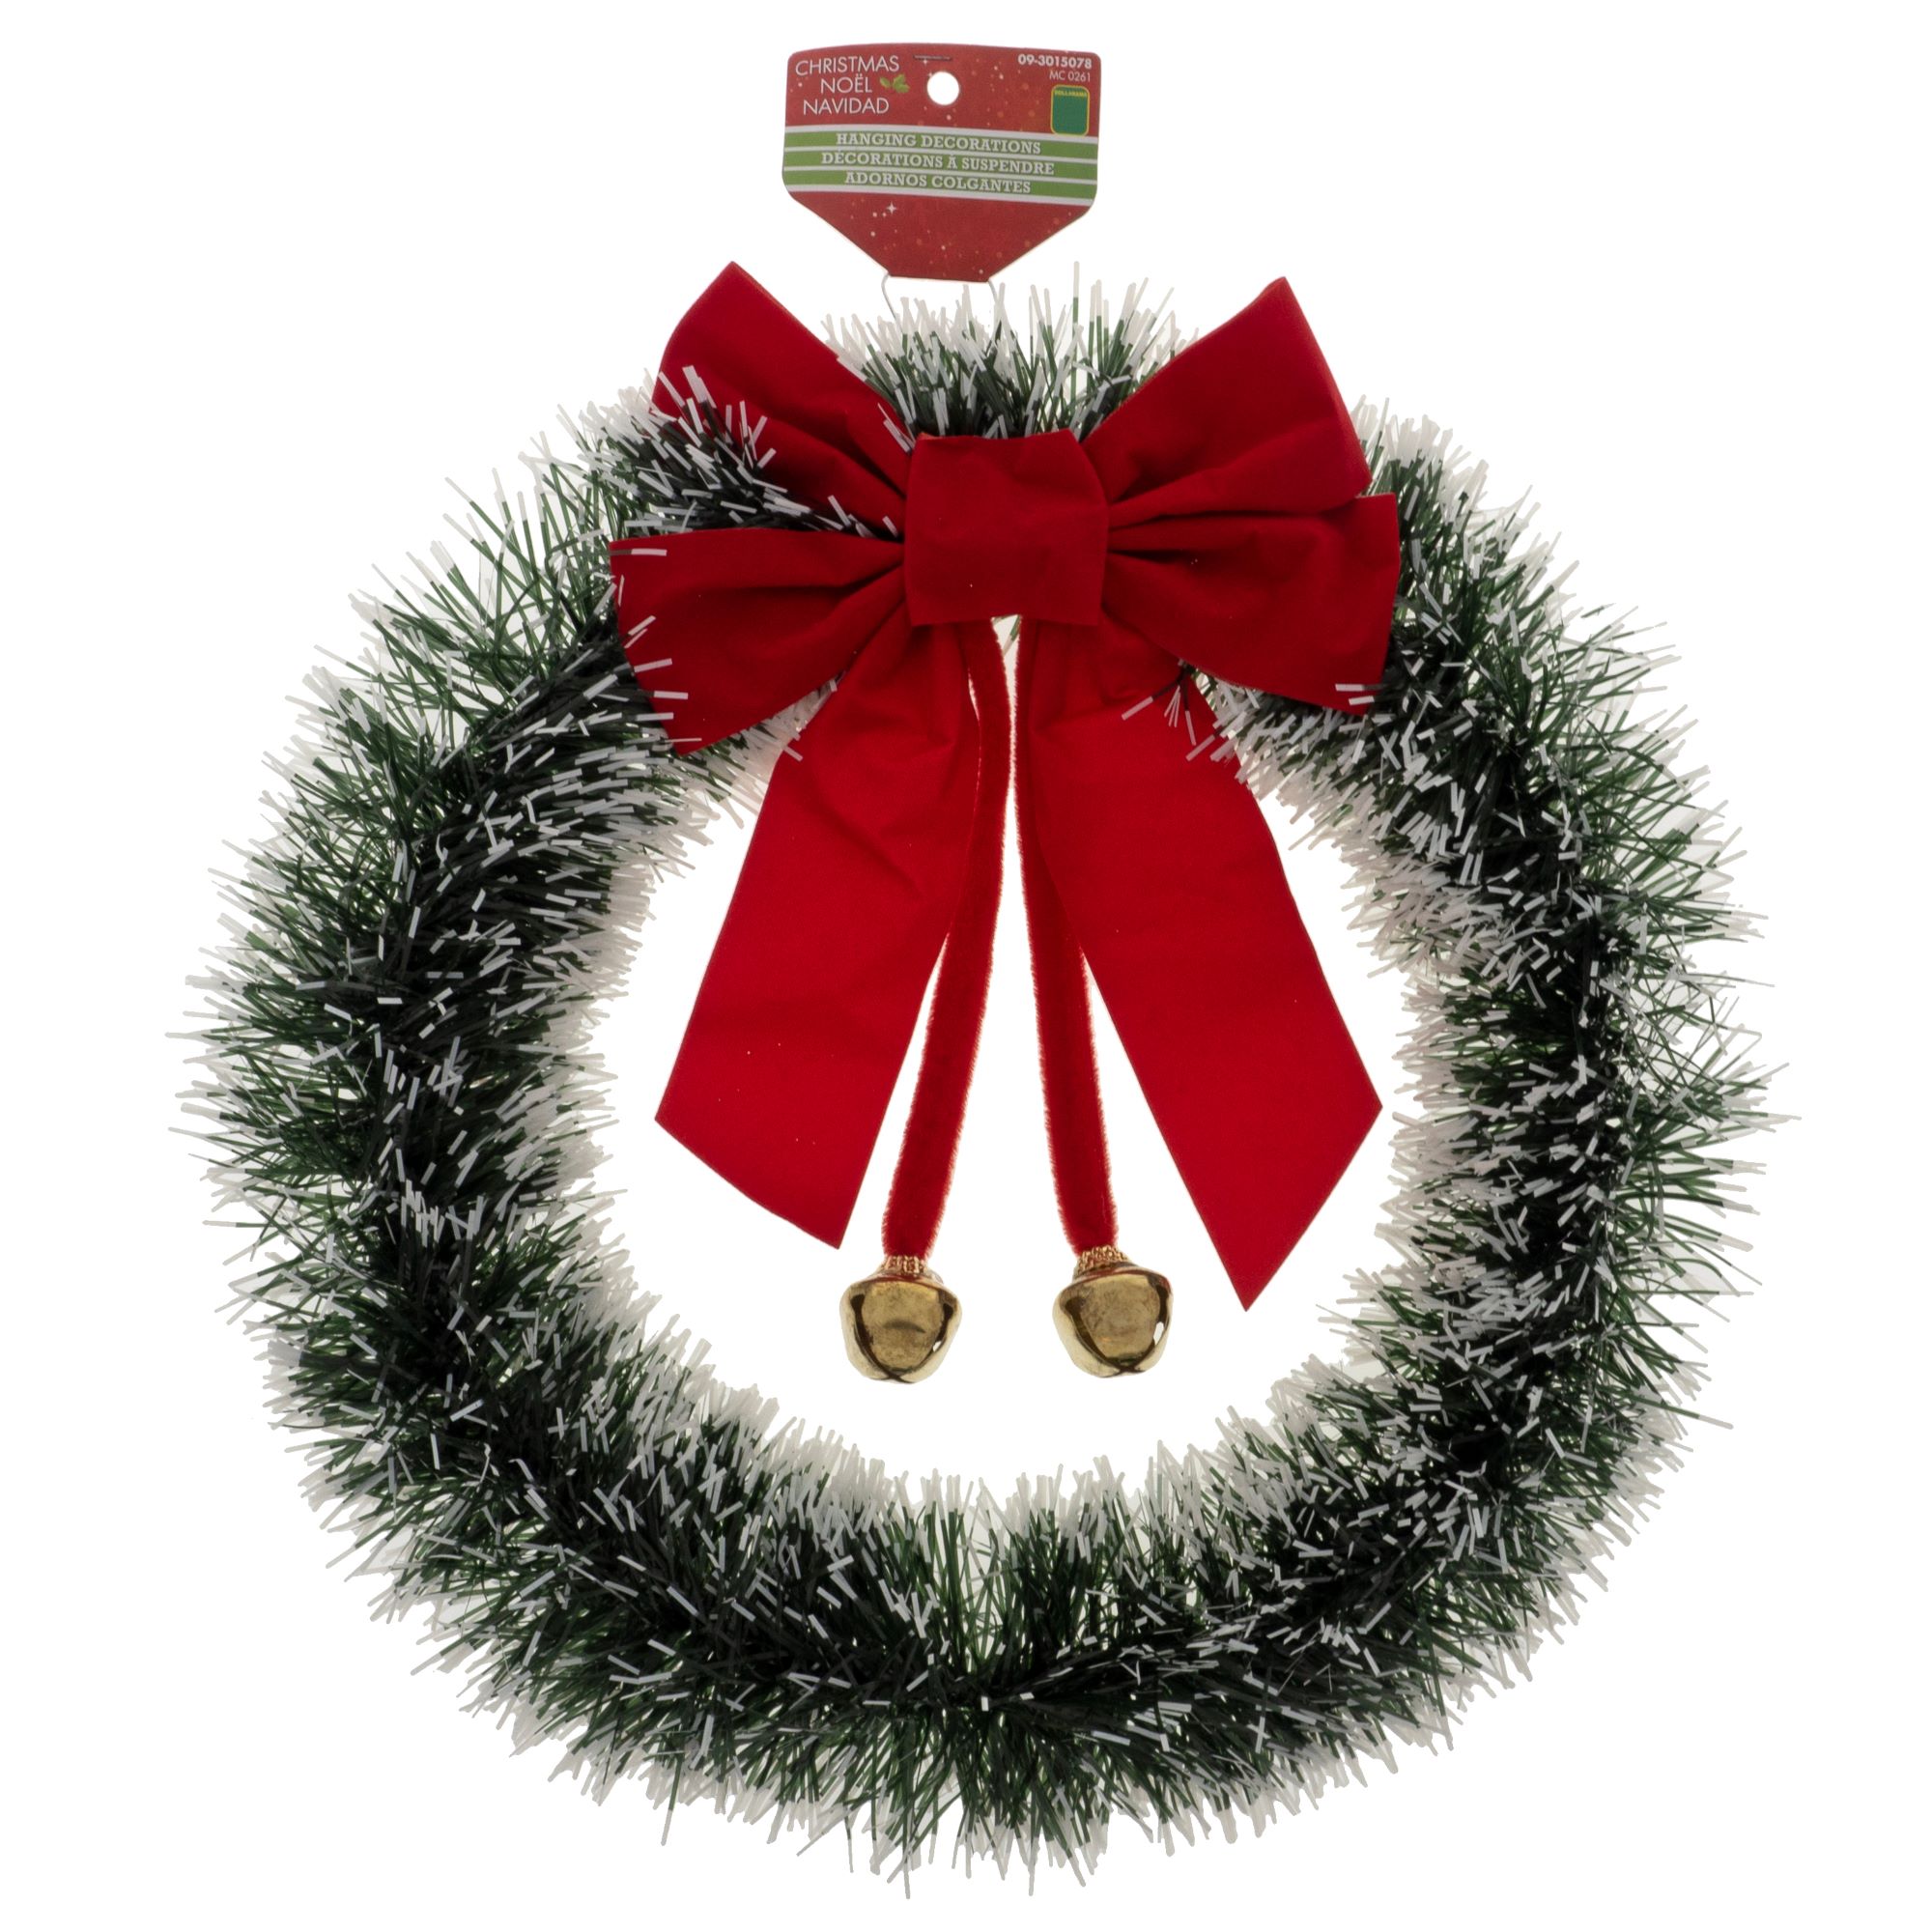 Christmas Tinsel Wreath with Bo and Bells - Case of 24